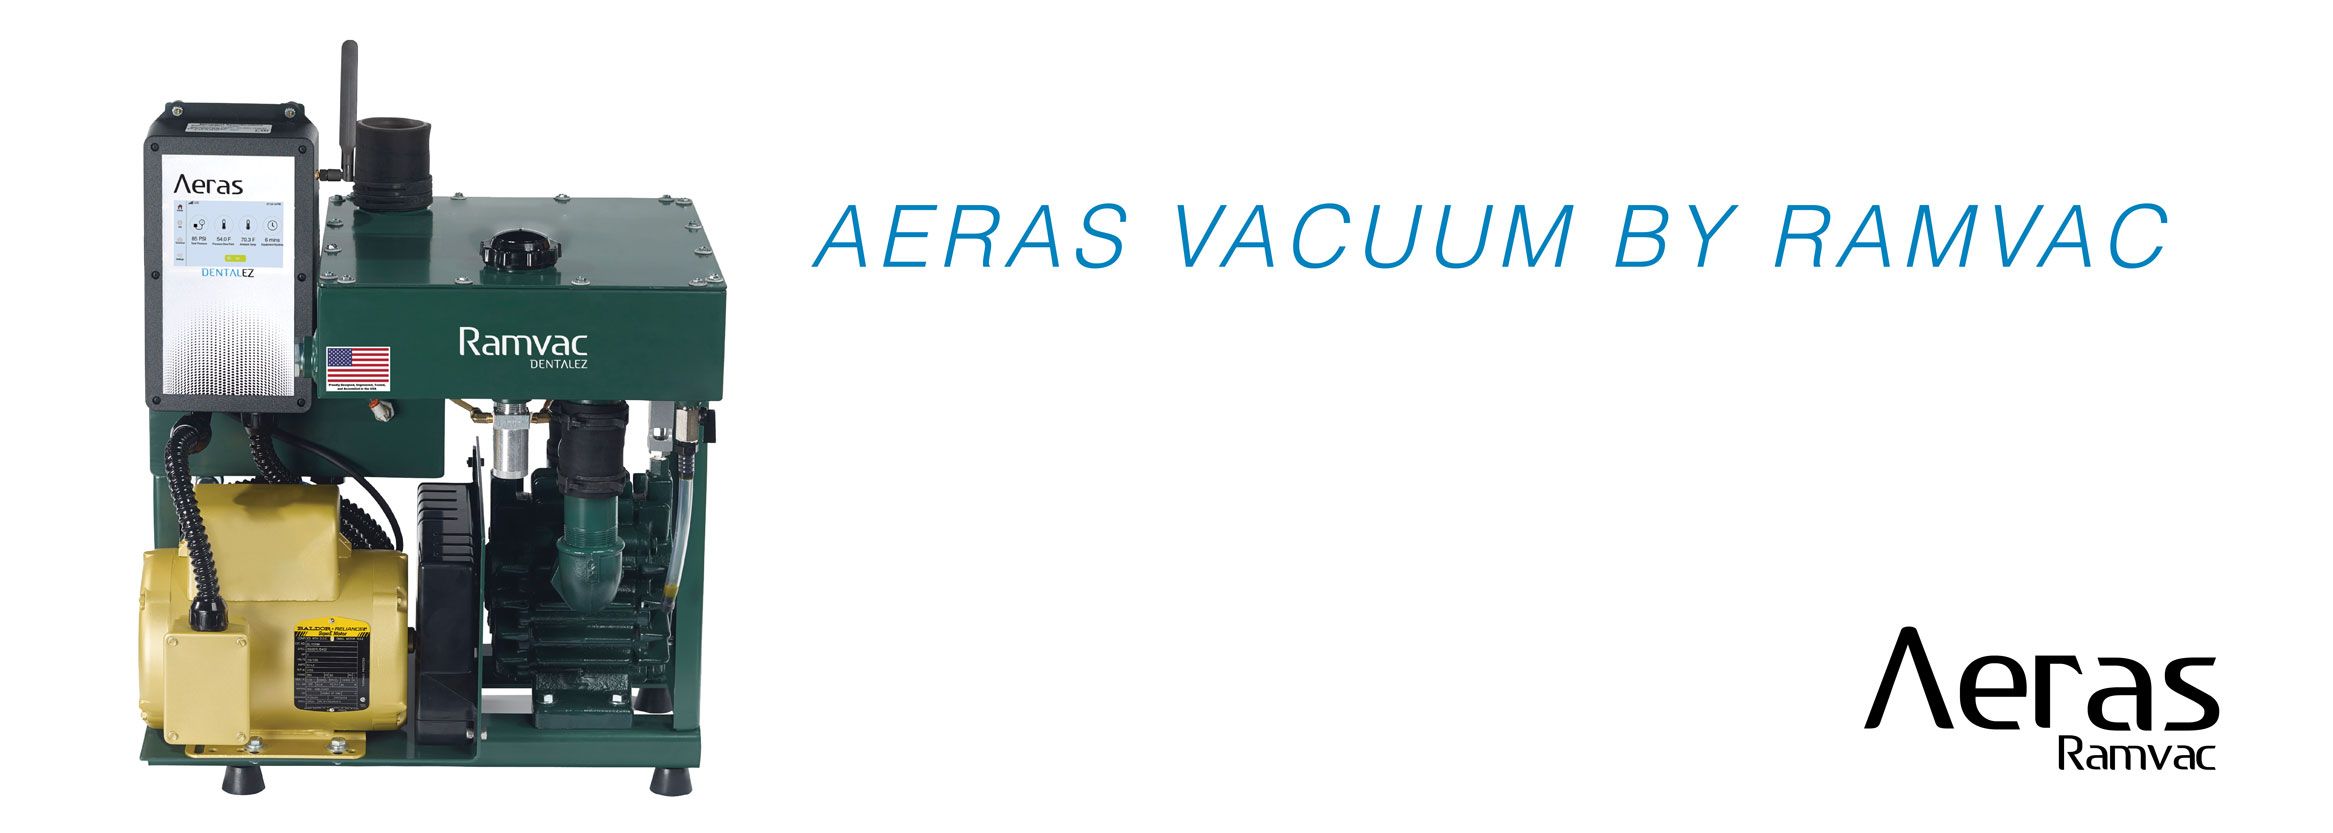 DENTALEZ continues focus on Smart Monitoring and announces newest addition to their Aeras Intelligent Platform